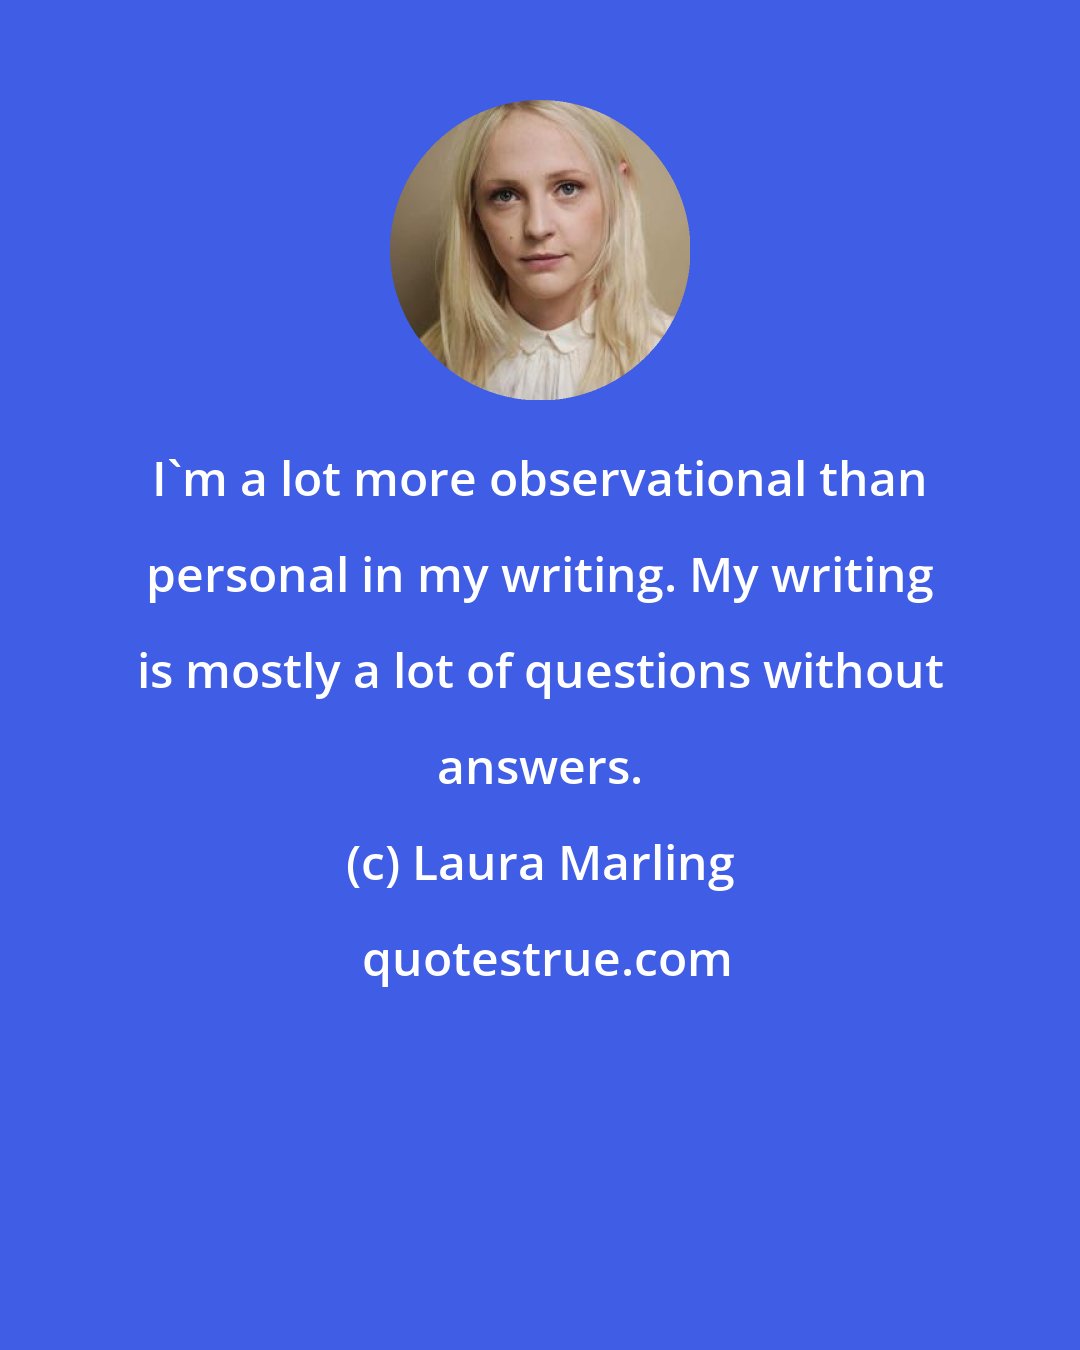 Laura Marling: I'm a lot more observational than personal in my writing. My writing is mostly a lot of questions without answers.